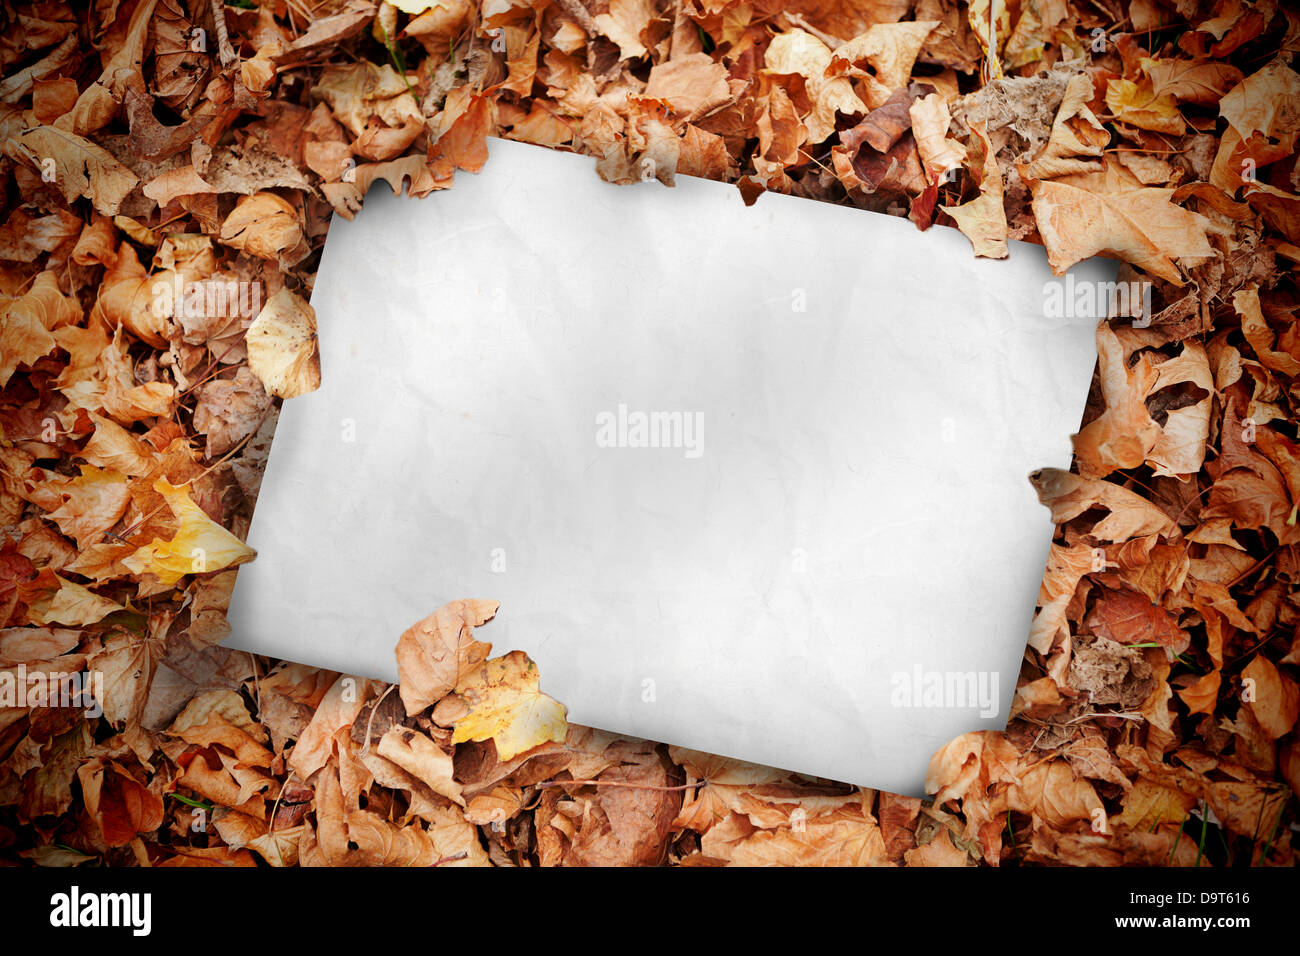 White poster buried into dead leaves Stock Photo